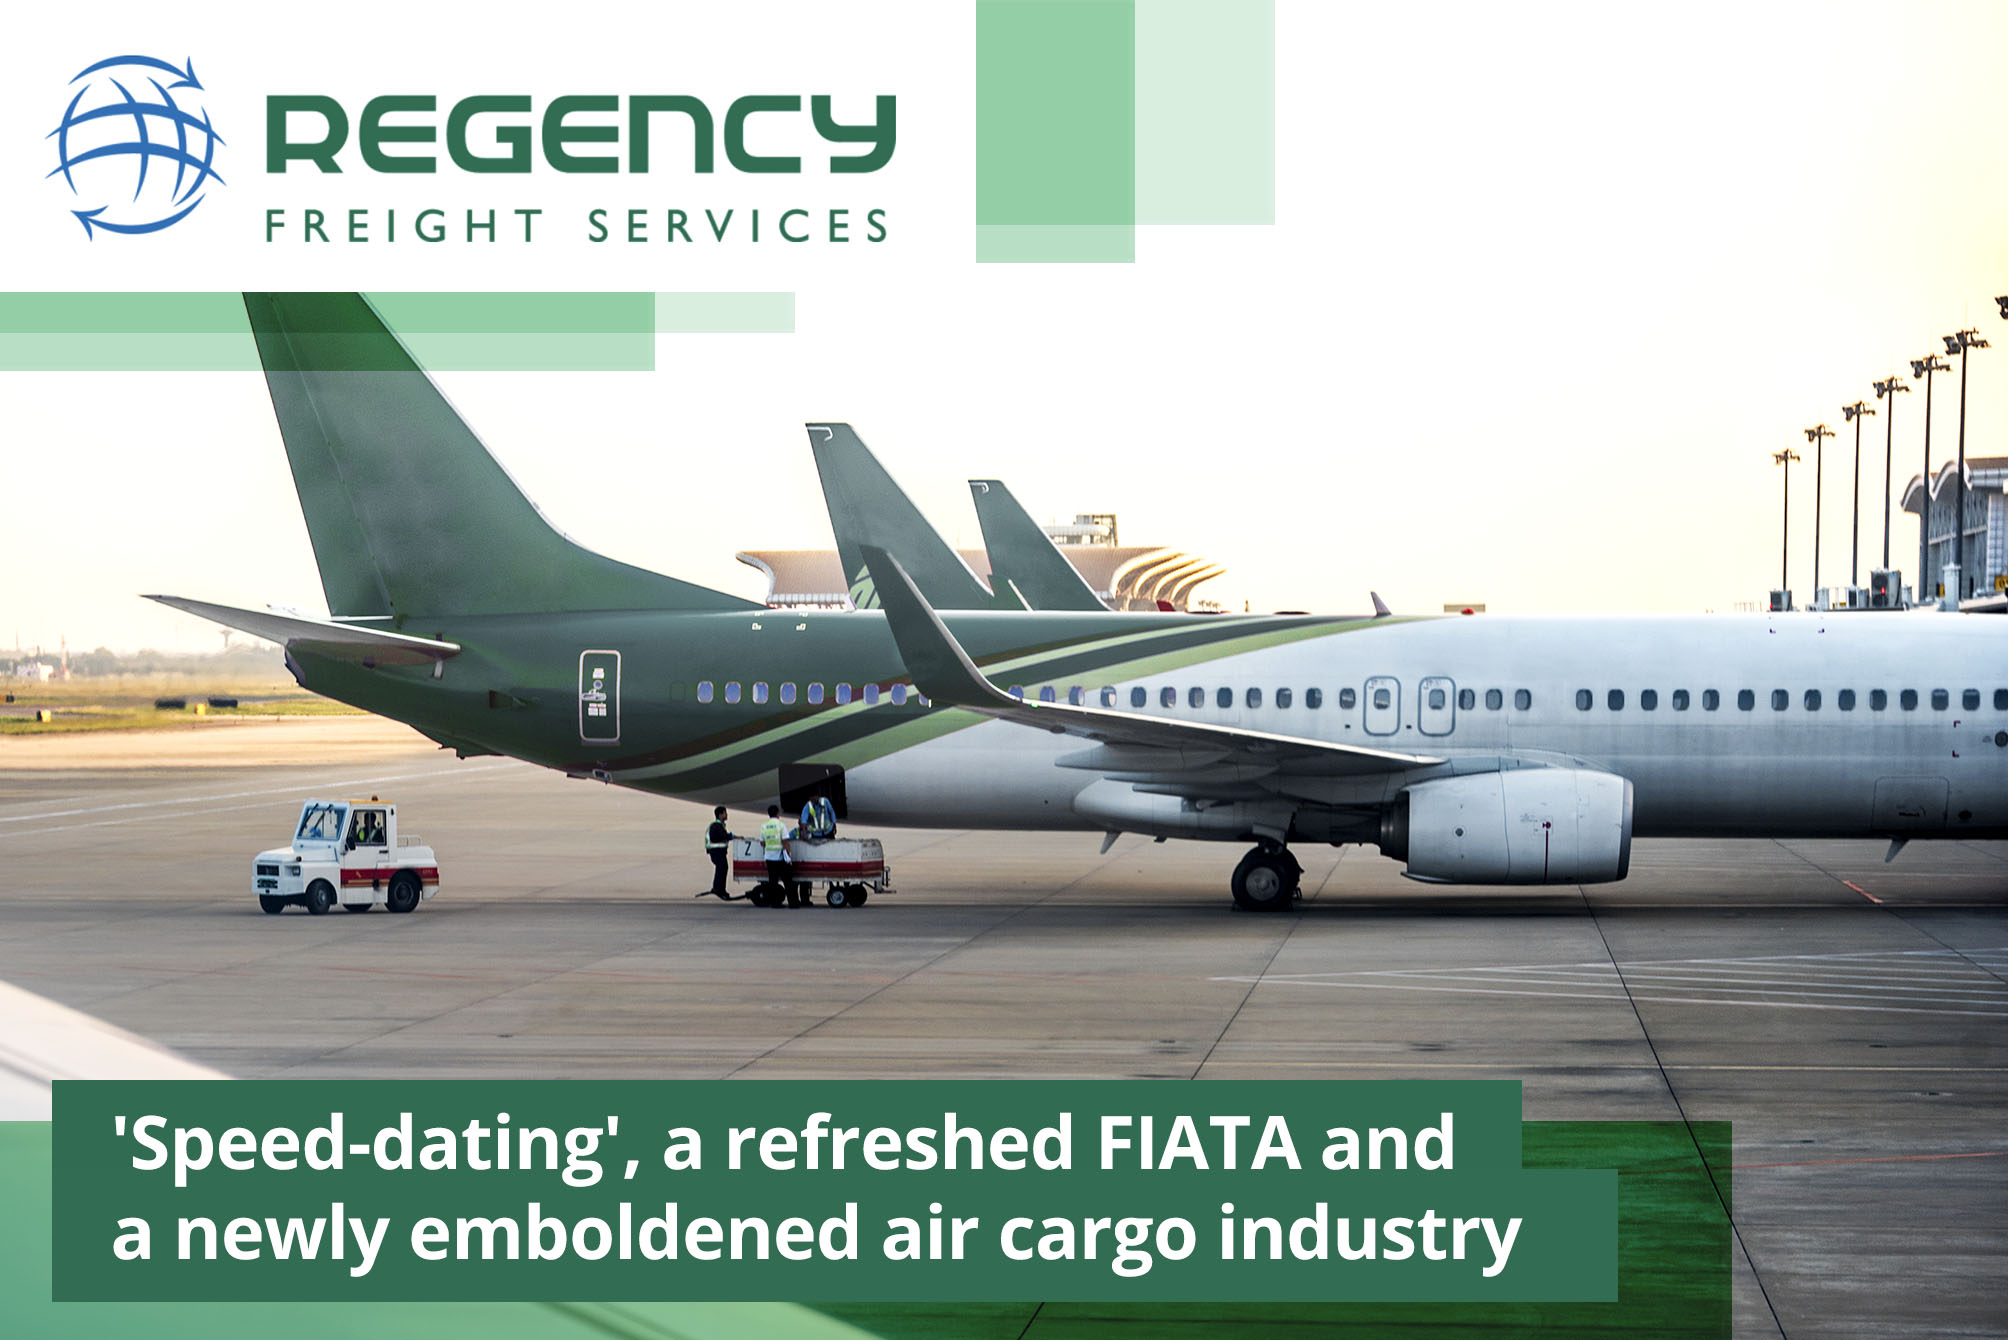 'Speed-dating', a refreshed FIATA and a newly emboldened air cargo industry